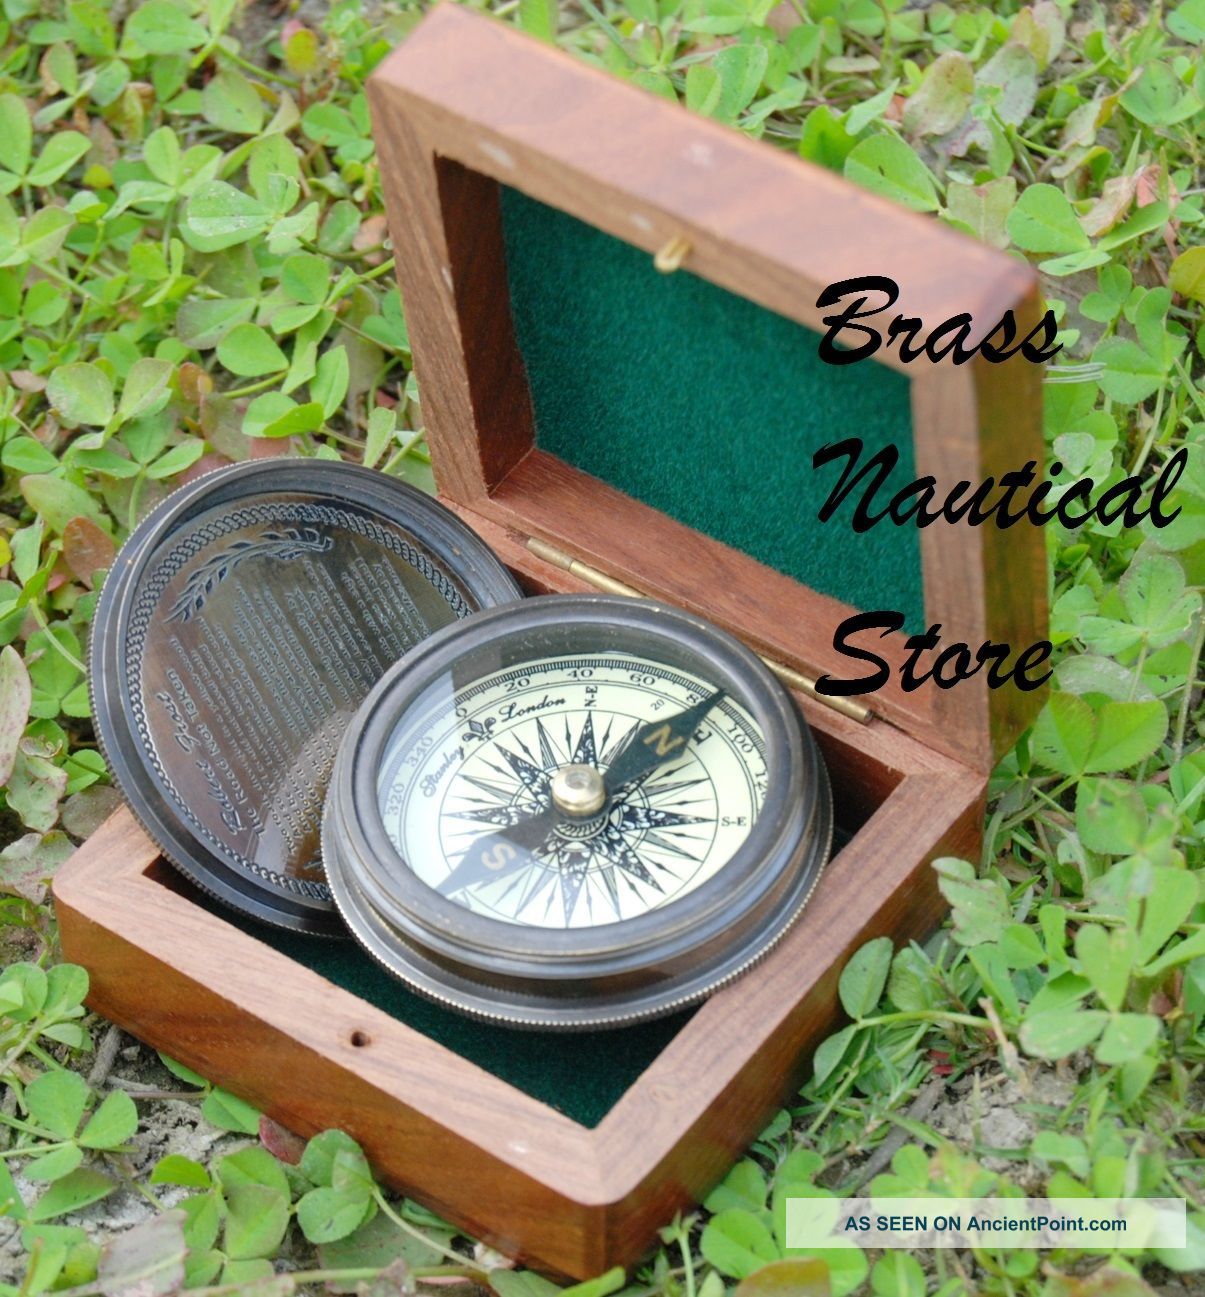 Robert Frost Brass & Copperstanley London Poem Engraved Compass With Wood Case See more Robert Frost Brass & Copperstanley London Poem... photo